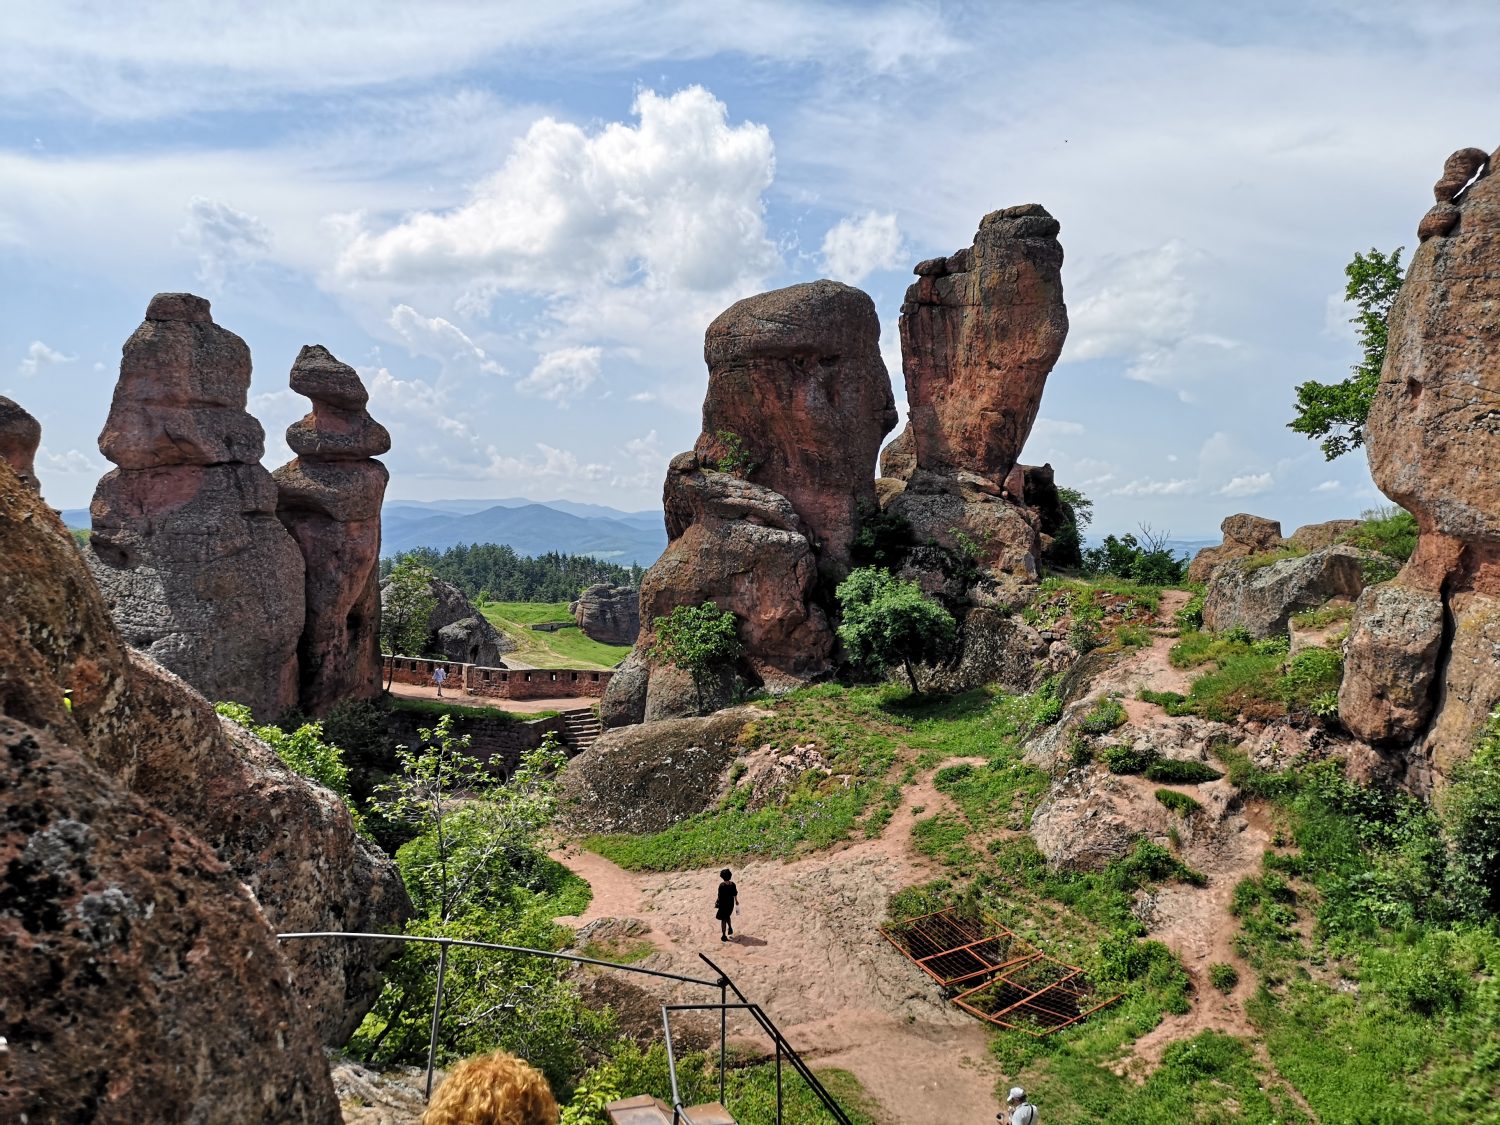 In the middle of Belogradchik Fortress